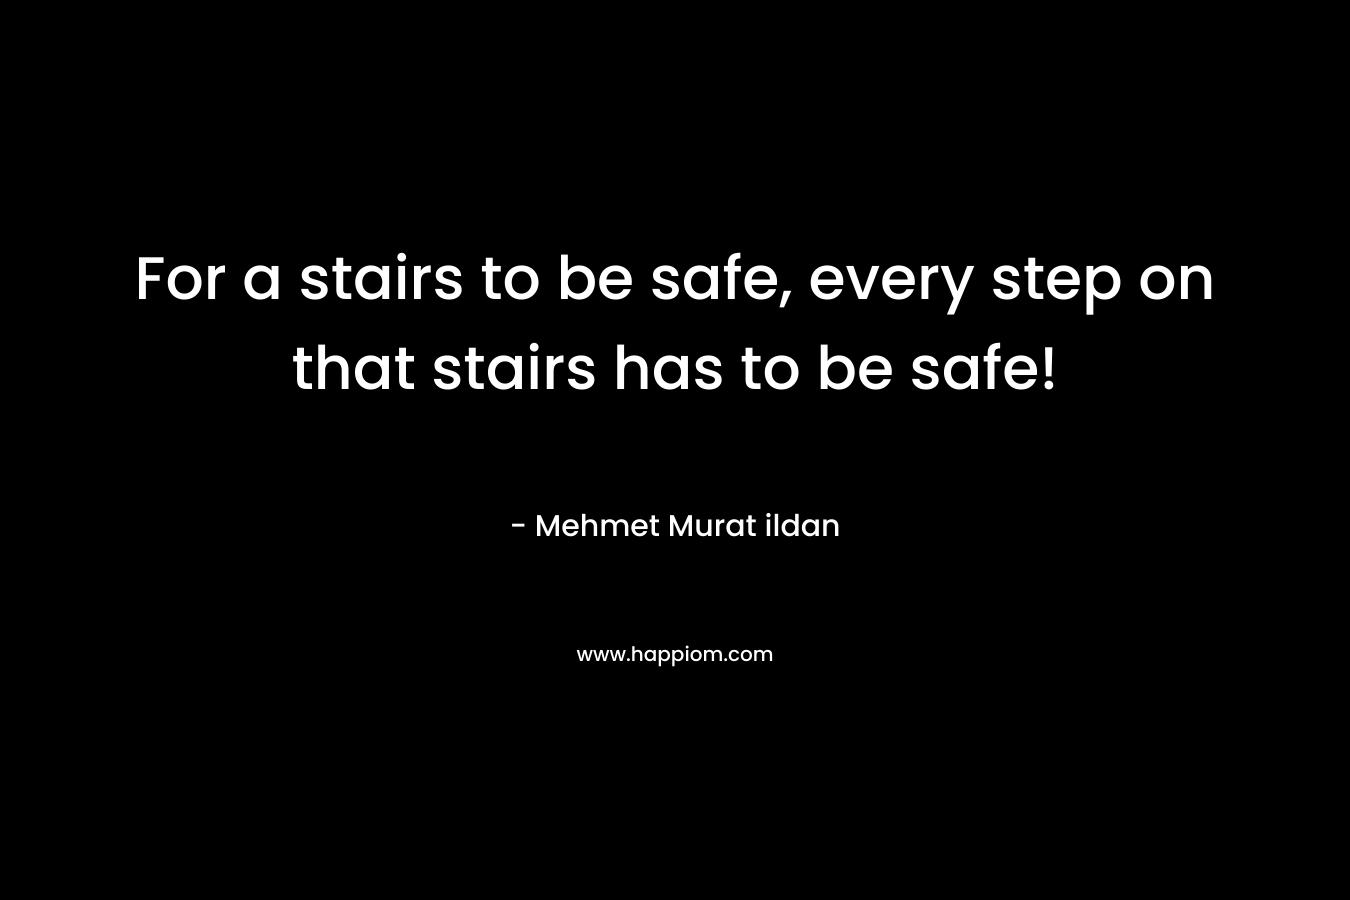 For a stairs to be safe, every step on that stairs has to be safe! – Mehmet Murat ildan